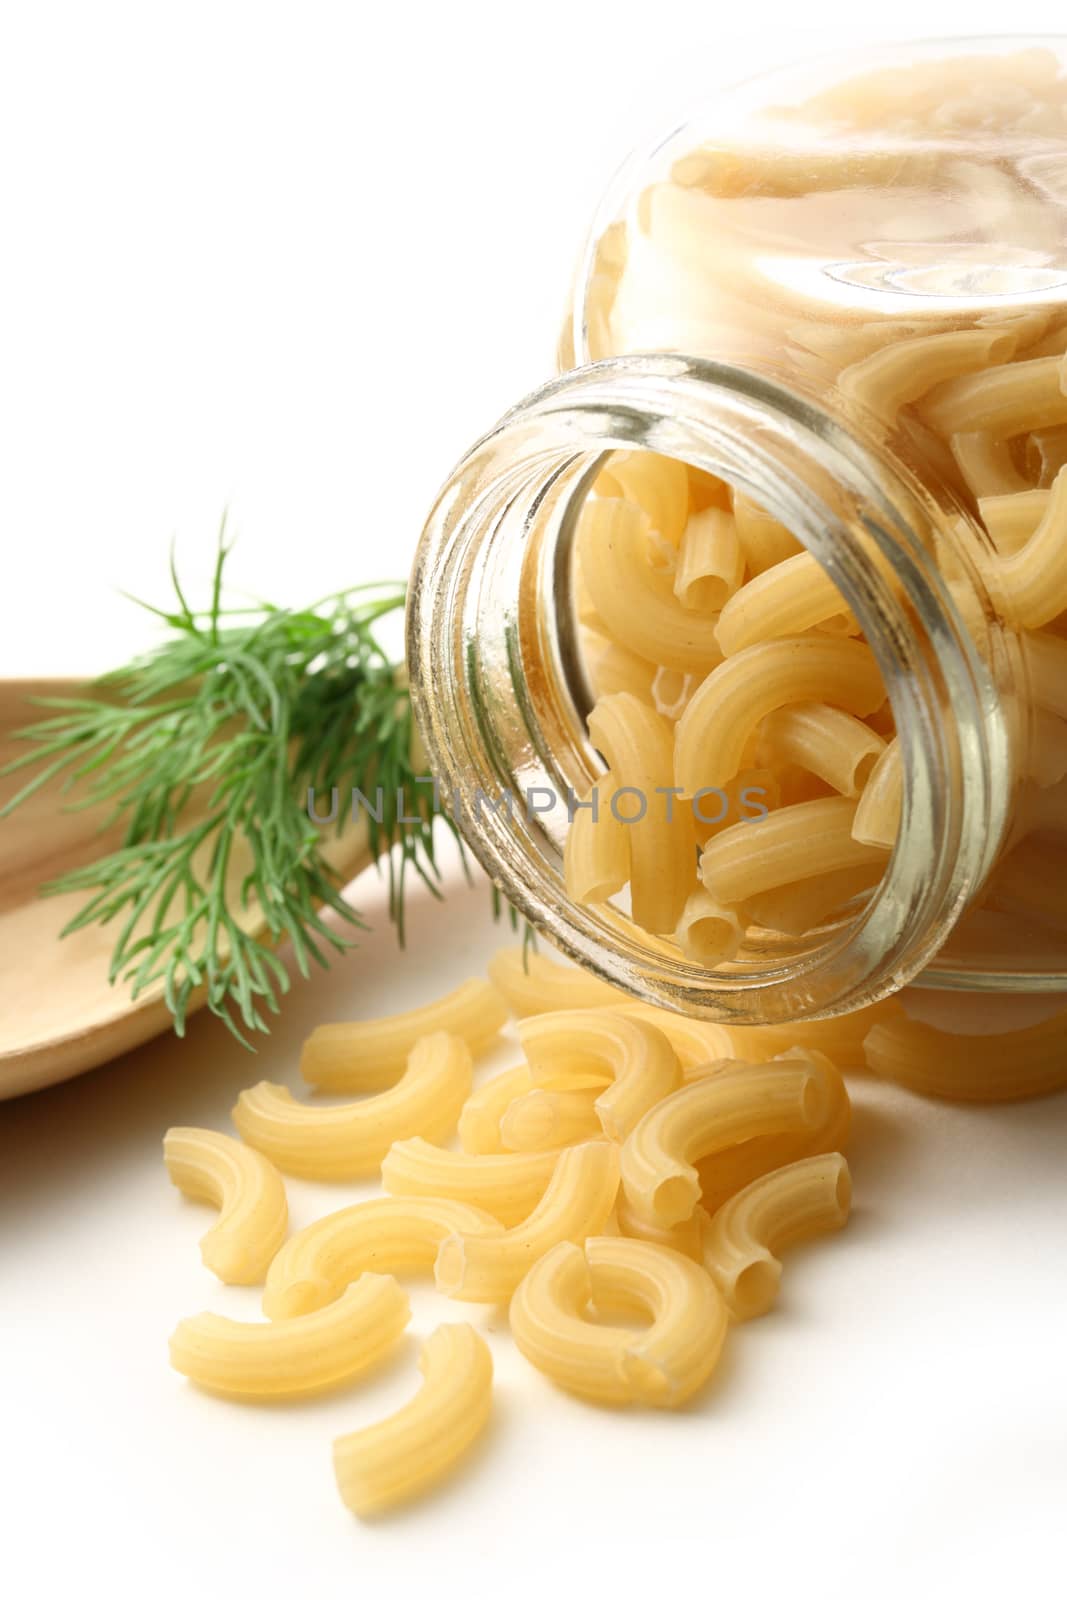 Short ribbed pasta tubes in jar and wooden spoon